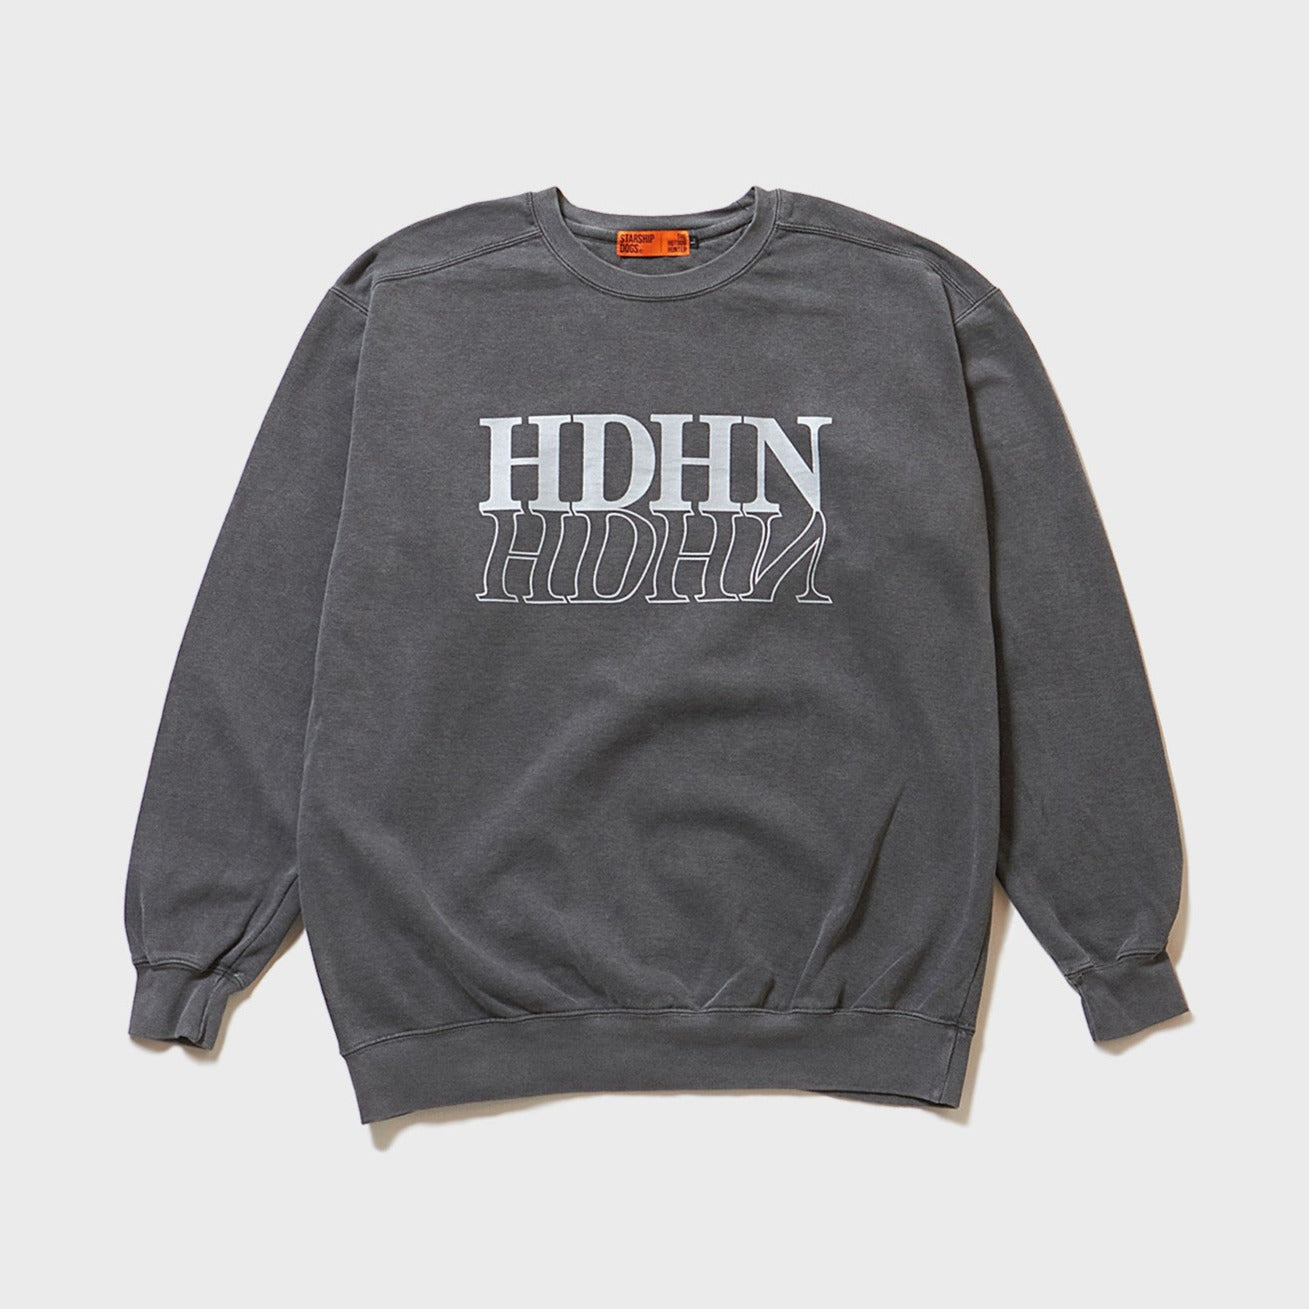 Product Front Photo: A pigment-dyed (coloring technique) cool sweatshirt in black with a dark grey appearance. On the chest, a large HDHN (abbreviation for HOTDOG HUNTER) logo is silk-screen printed, resembling a reflection on water and a mirror. The print is in light grey and is single-colored.